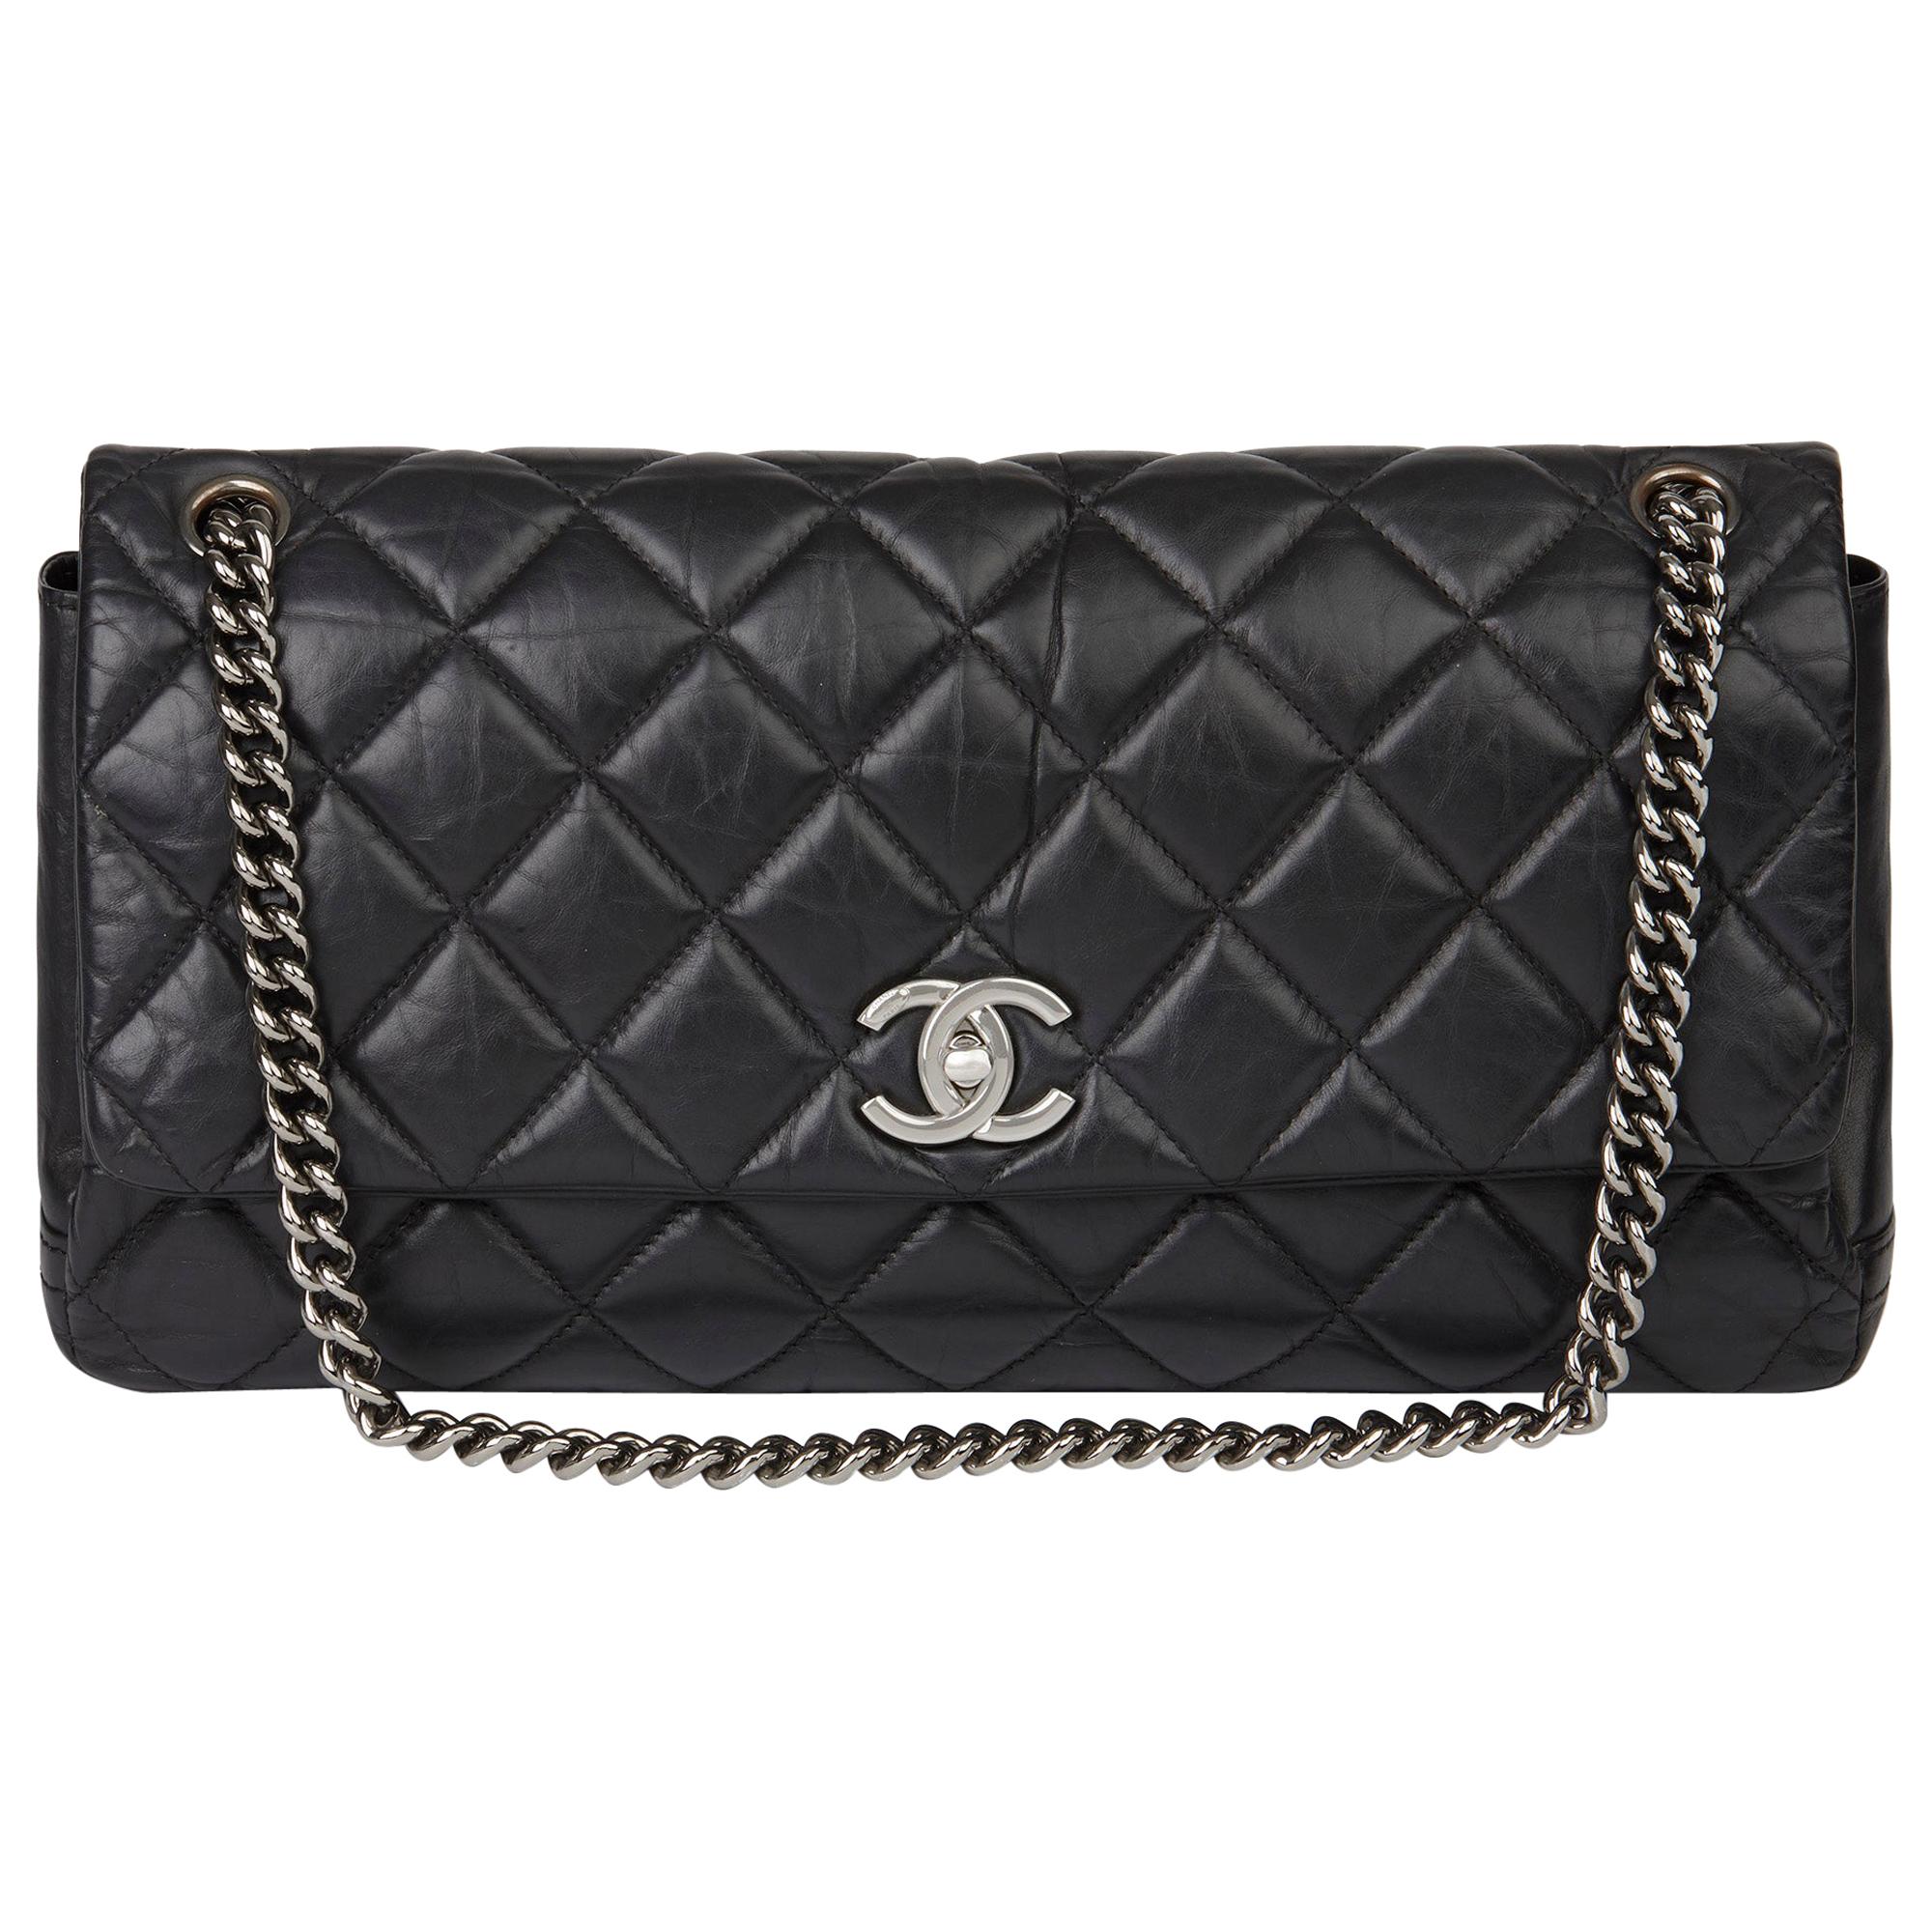 Chanel Black Quilted Aged Calfskin Leather Jumbo Lady Pearly Flap Bag